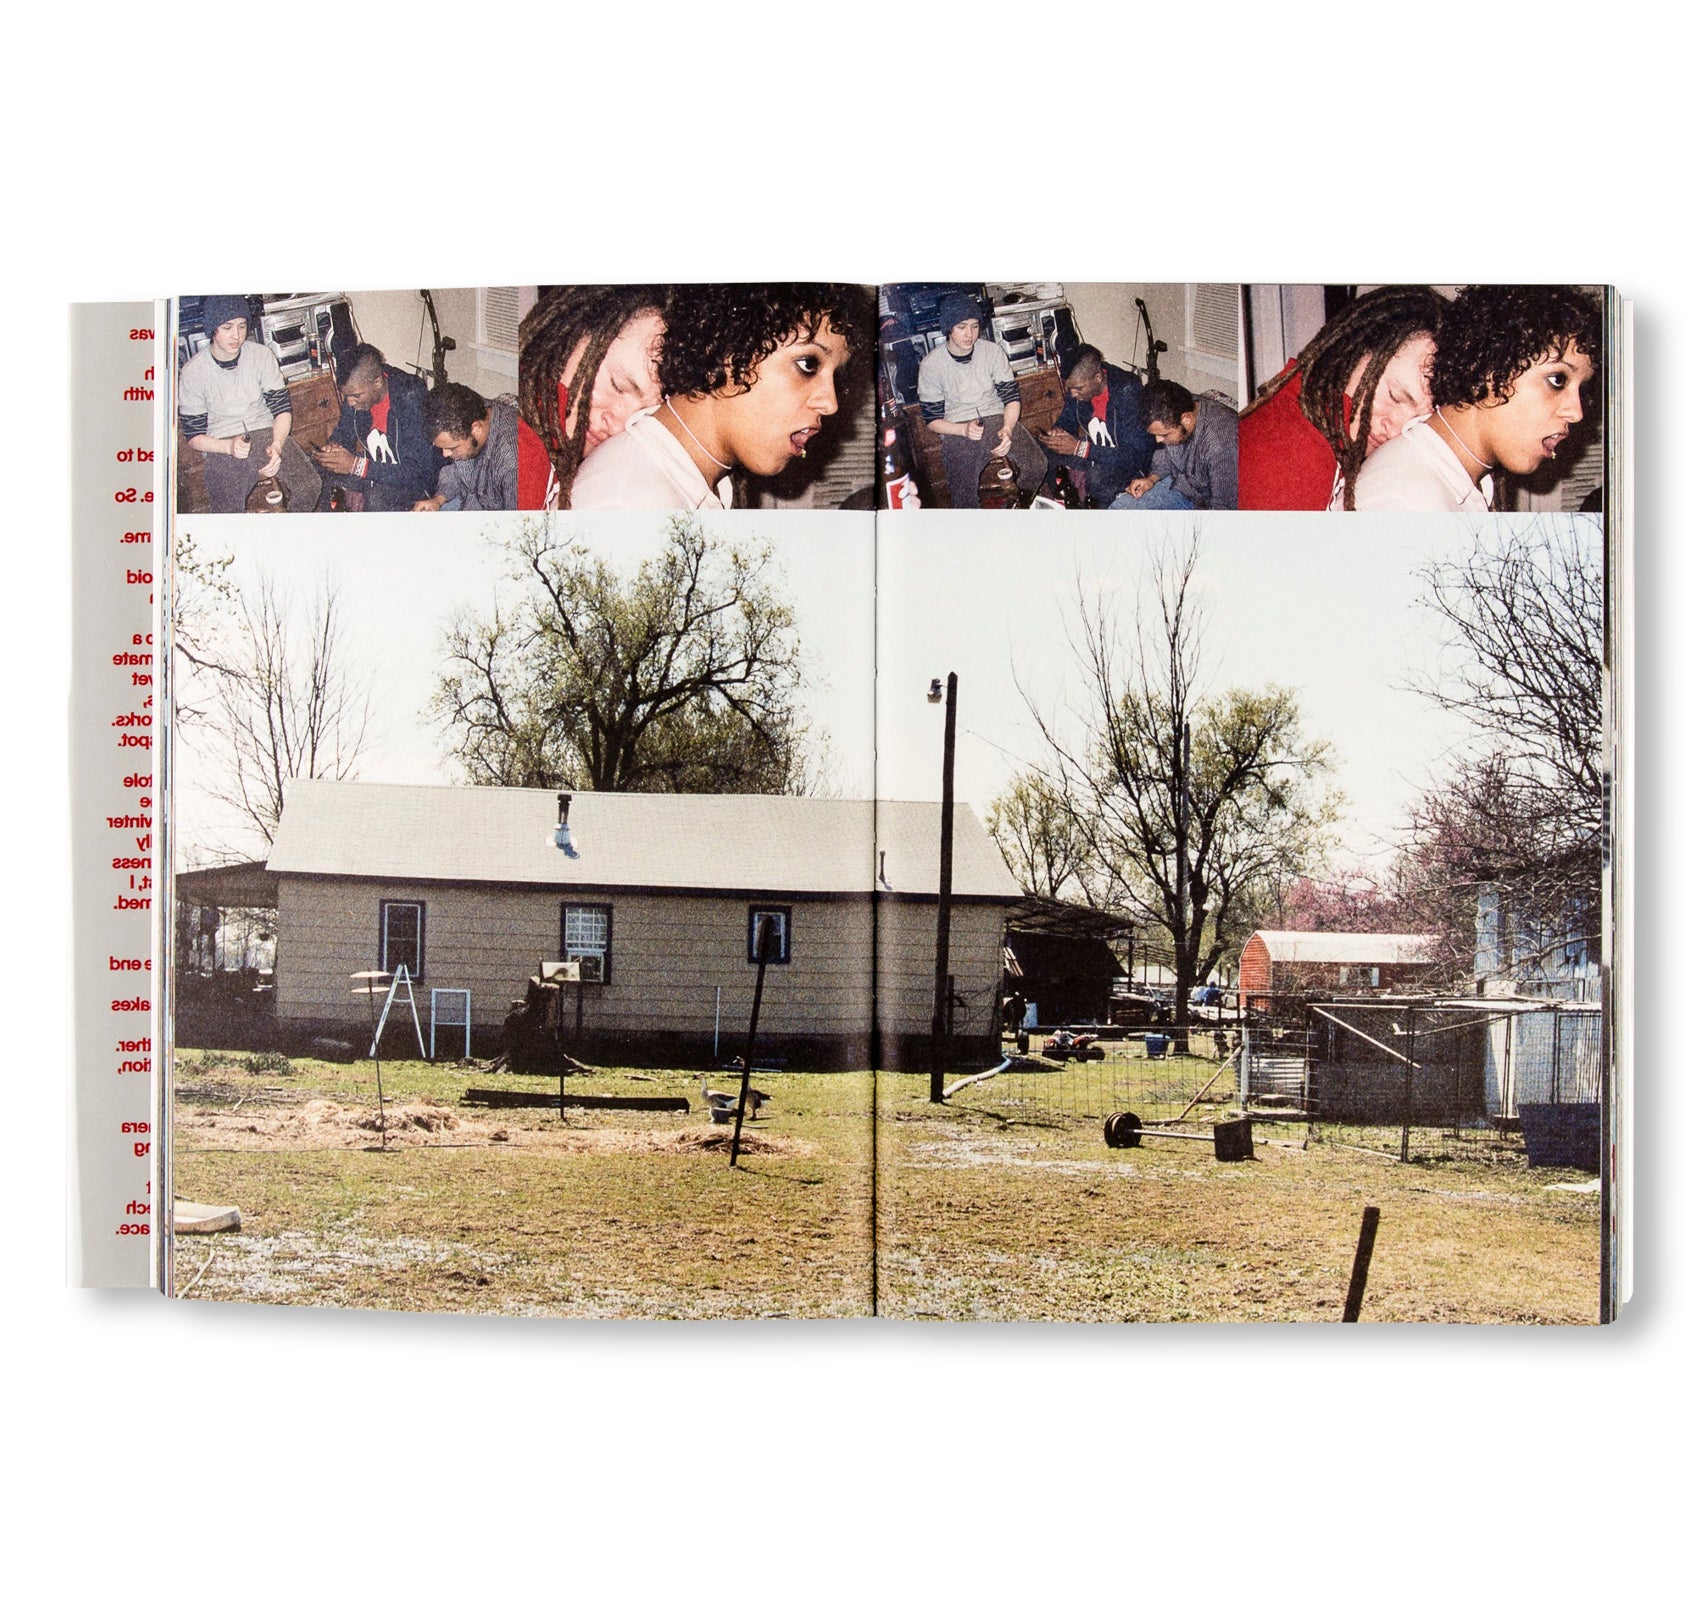 THE LAST SURVIVOR IS THE FIRST SUSPECT by Nick Haymes [SPECIAL EDITION]